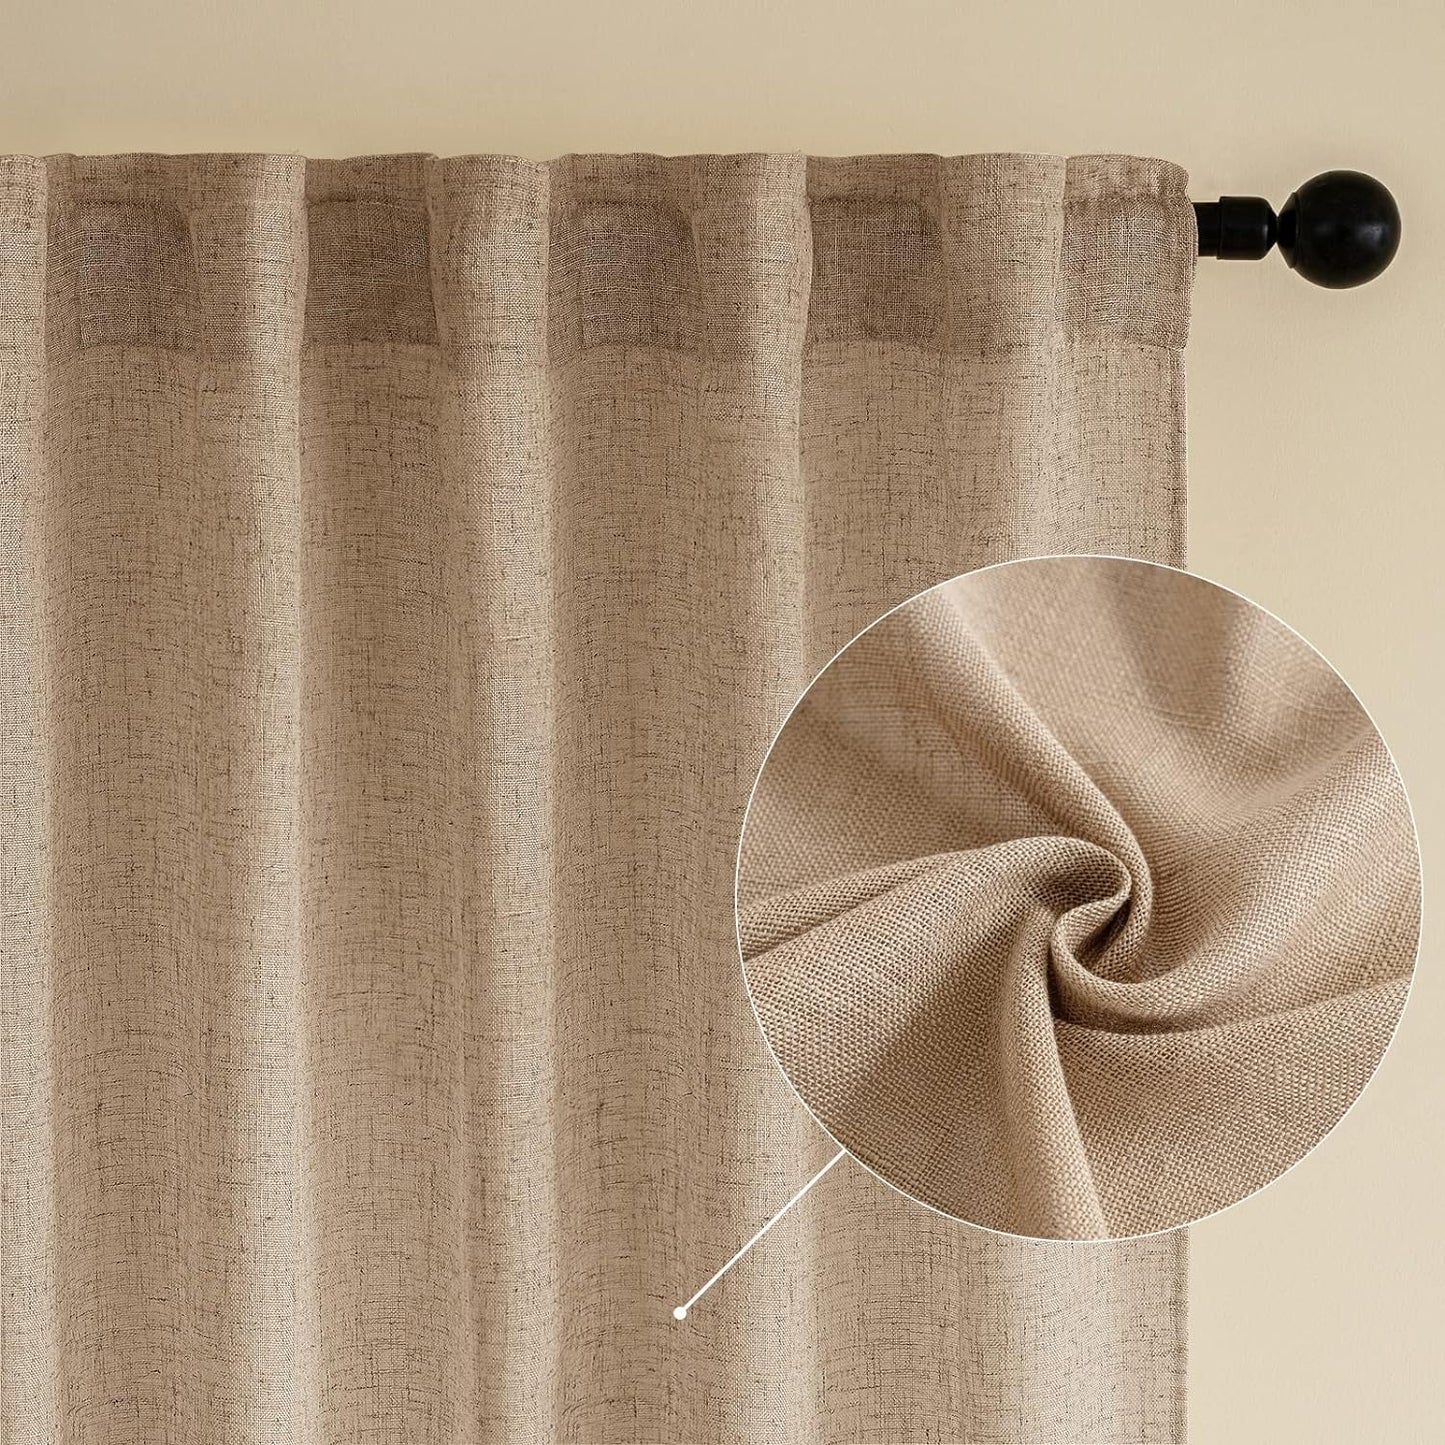 EMEMA Olive Green Velvet Curtains 84 Inch Length 2 Panels Set, Room Darkening Luxury Curtains, Grommet Thermal Insulated Drapes, Window Curtains for Living Room, W52 X L84, Olive Green  EMEMA Linen / Brown W52" X L96" 